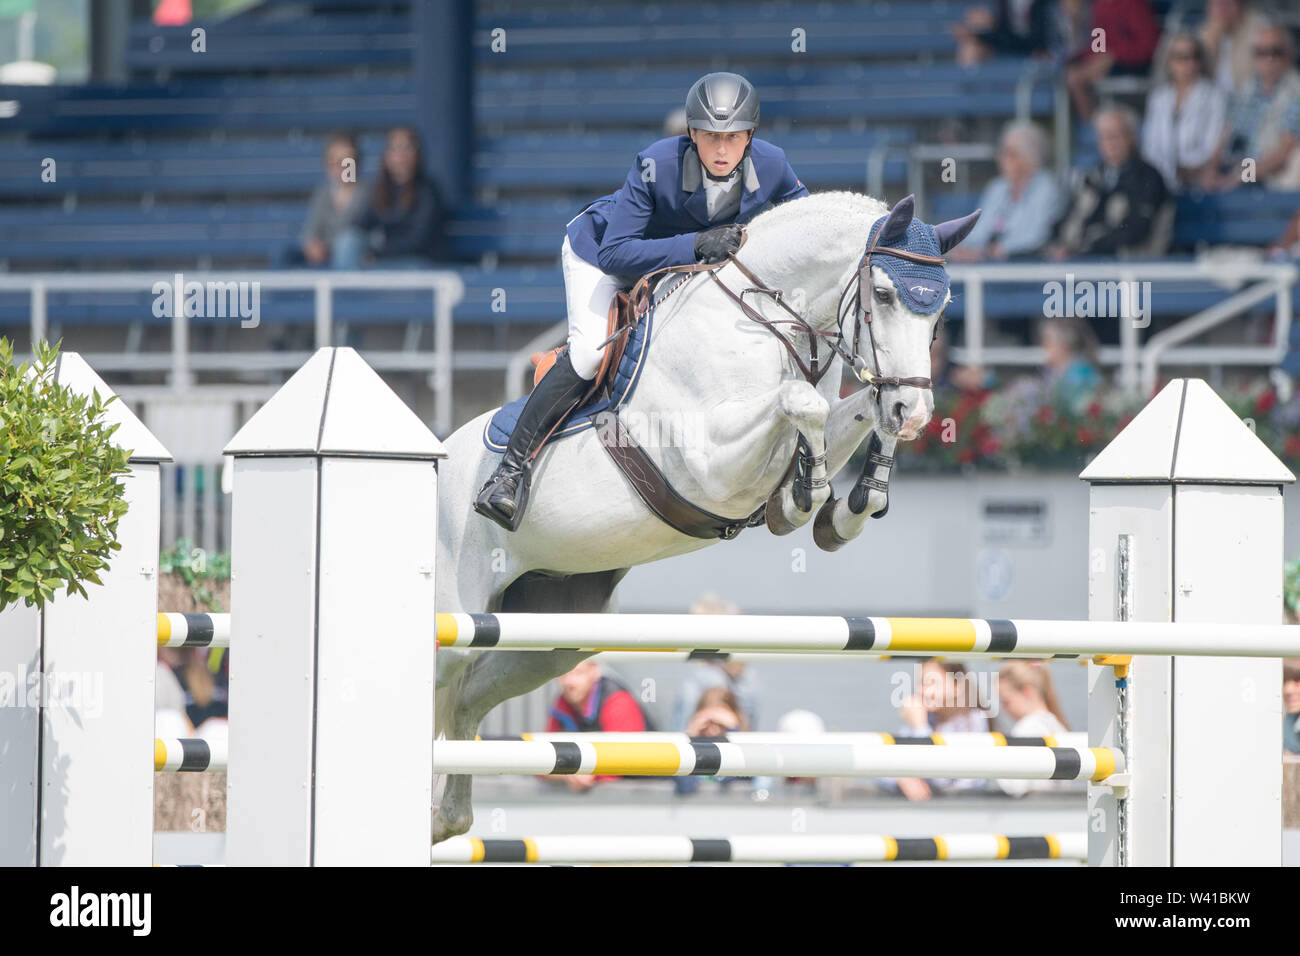 Martin FUCHS, SUI, on Clooney 51, Action, Prize of the craft, Springprüfung (Fehler/Zeit), World Equestrian Festival, CHIO Aachen 2019 from 16.07 - 21.07.2019 in Aachen/Germany; | Usage worldwide Stock Photo